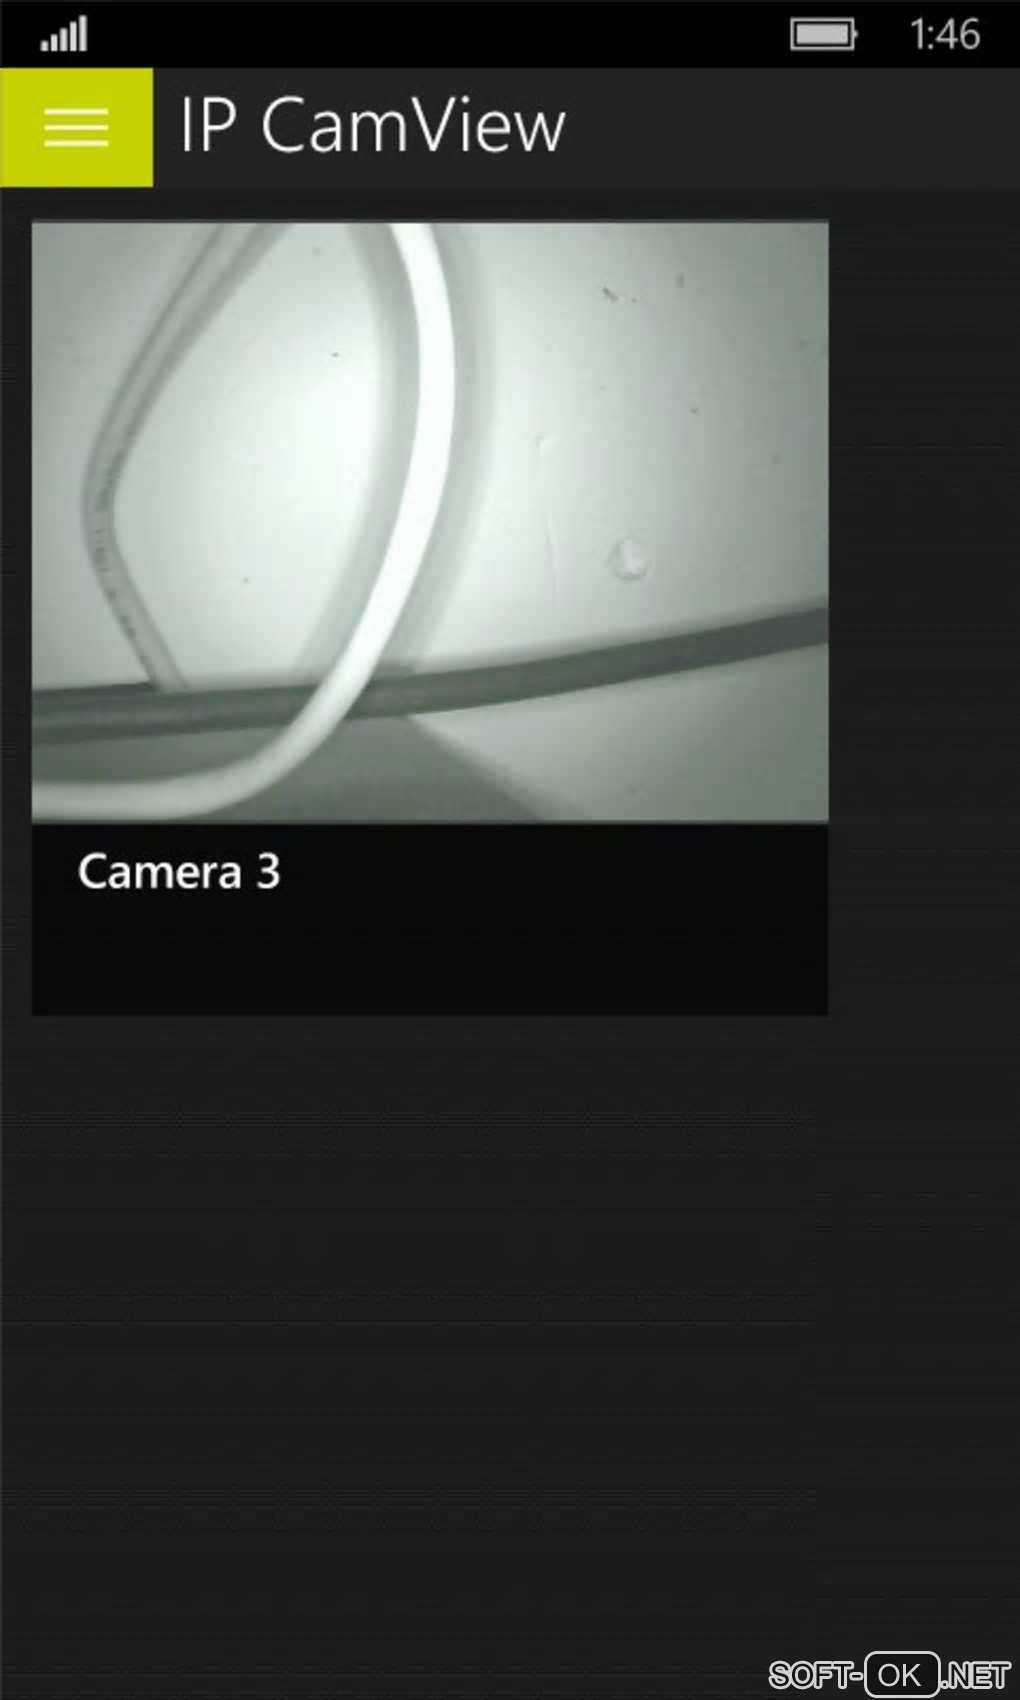 The appearance "IP CamView"